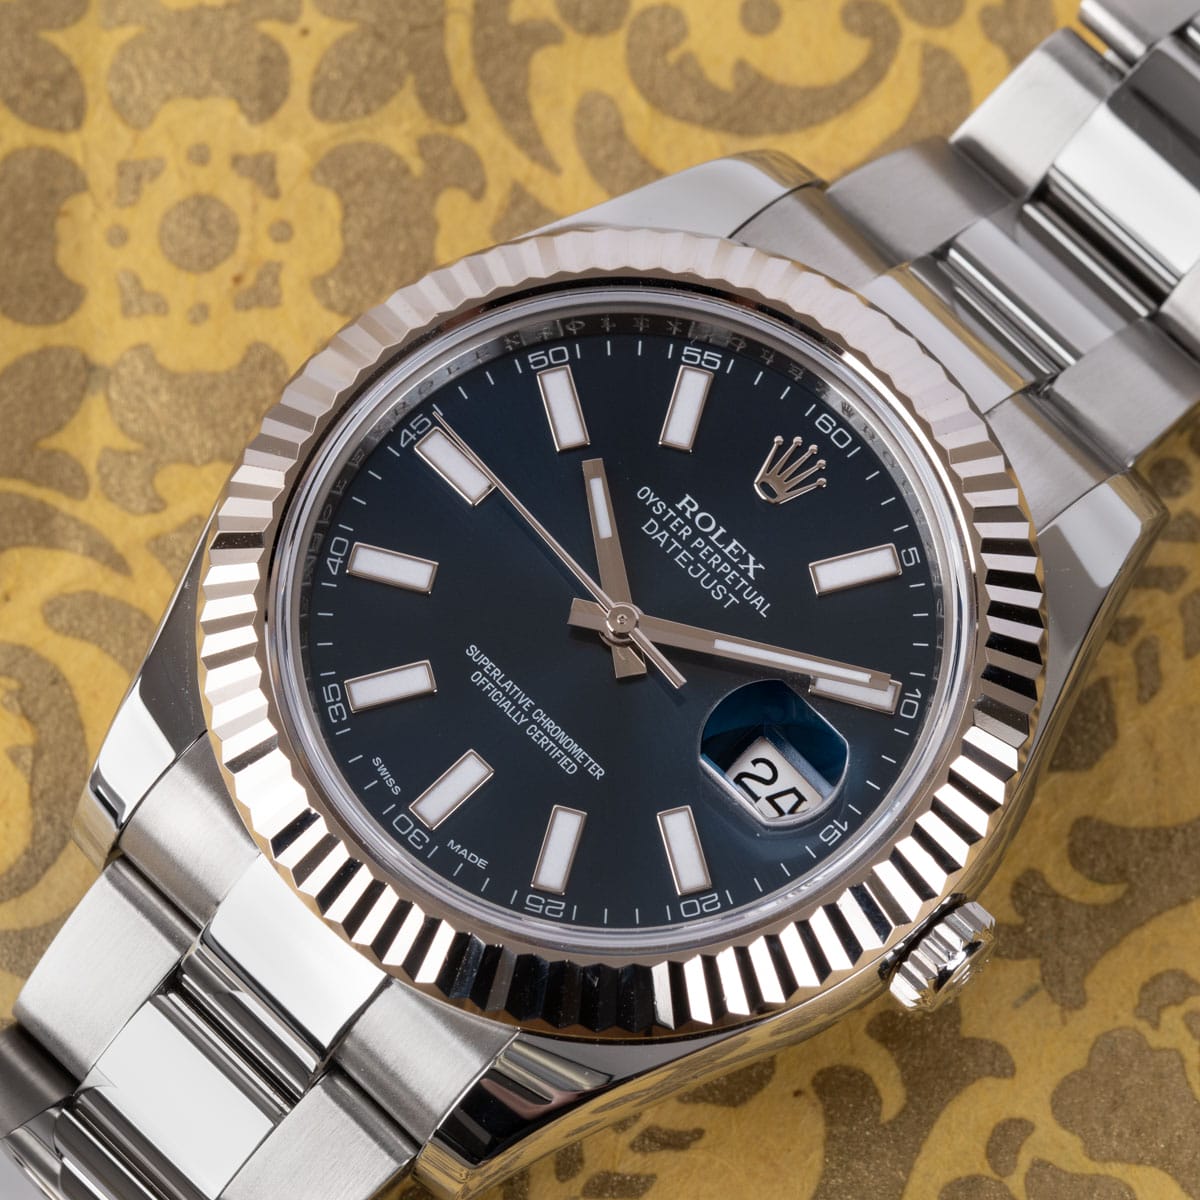 Stylied photo of  of Datejust II